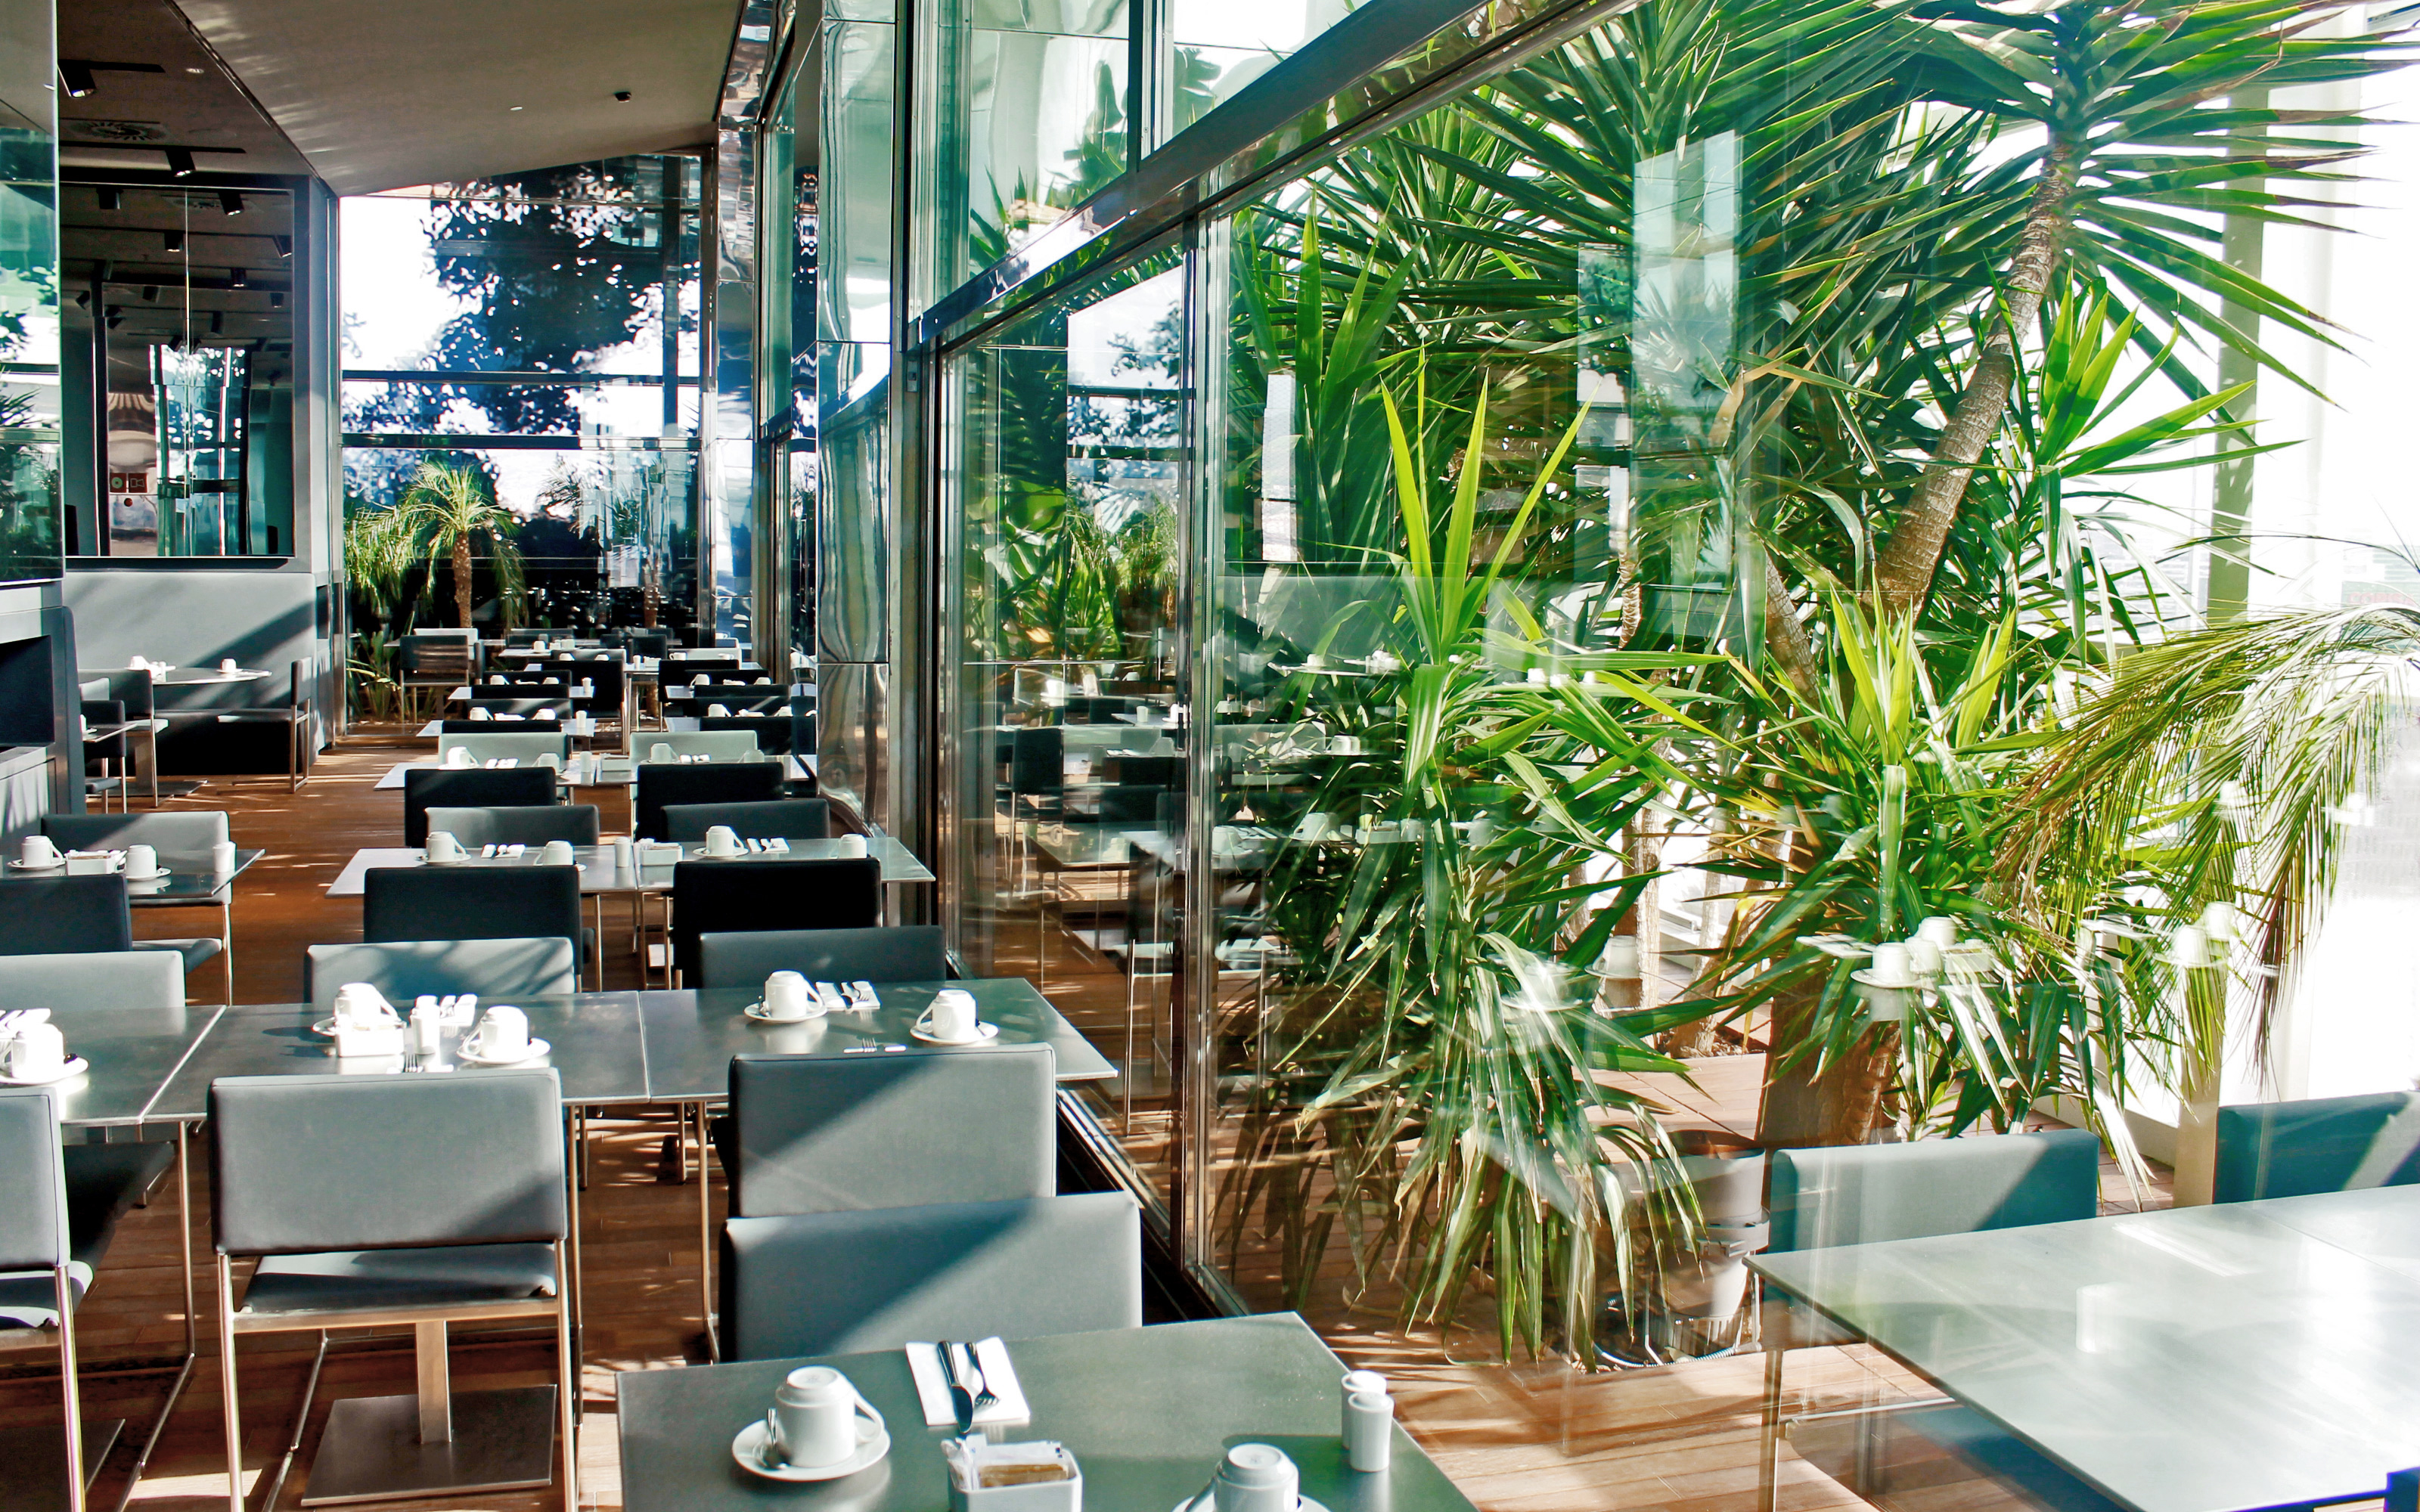 Tables in a restaurant surrounded by greenery